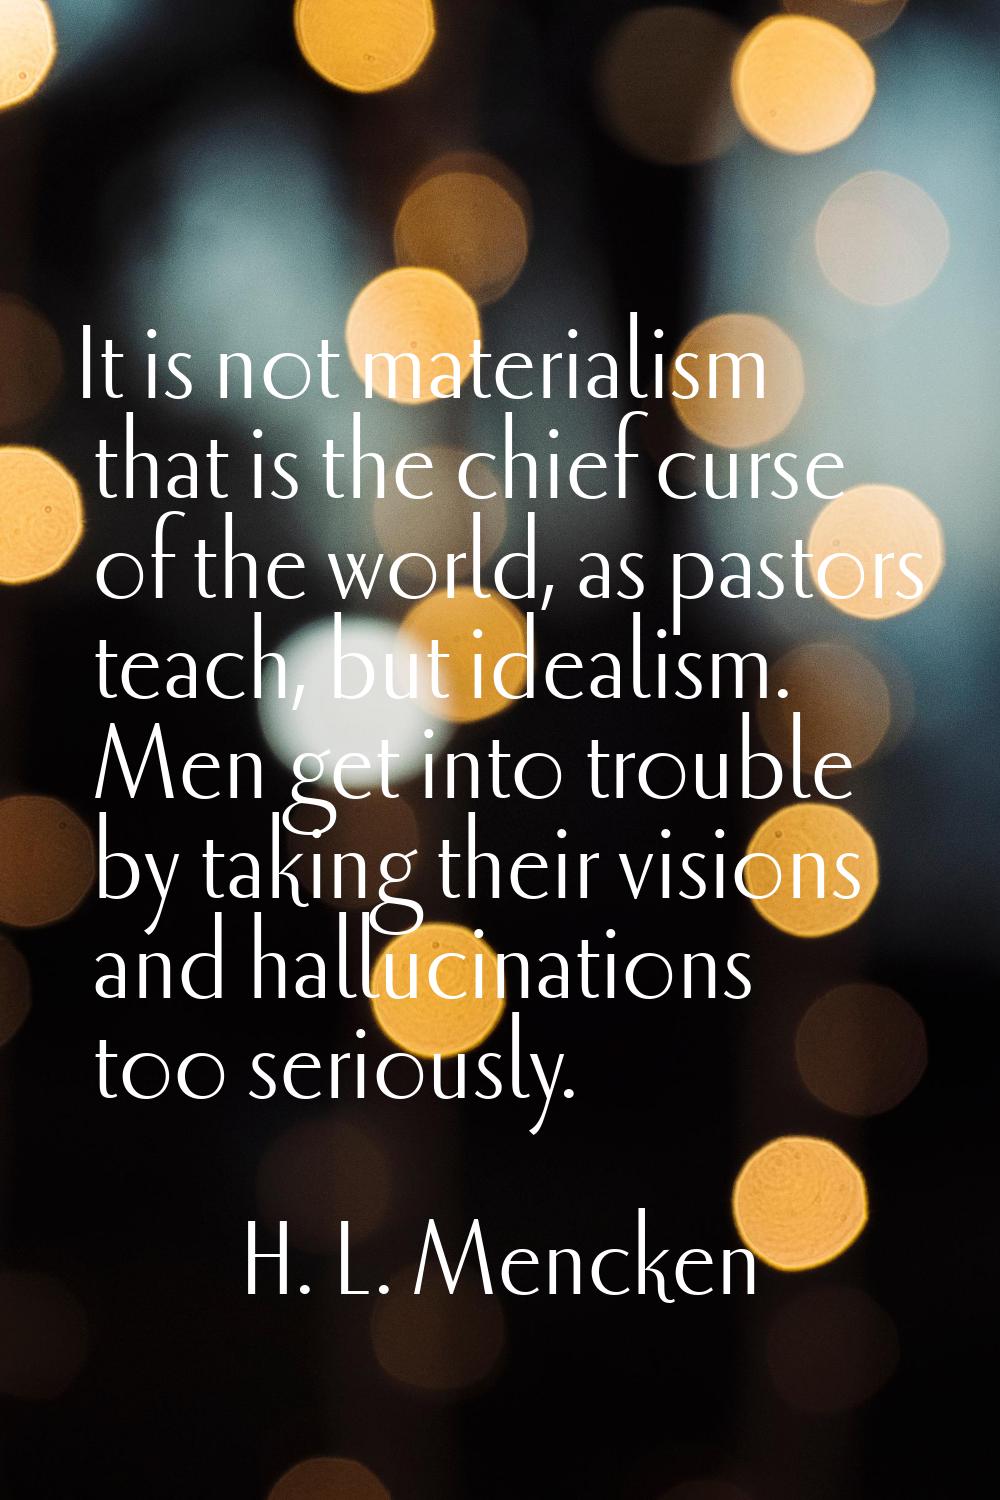 It is not materialism that is the chief curse of the world, as pastors teach, but idealism. Men get